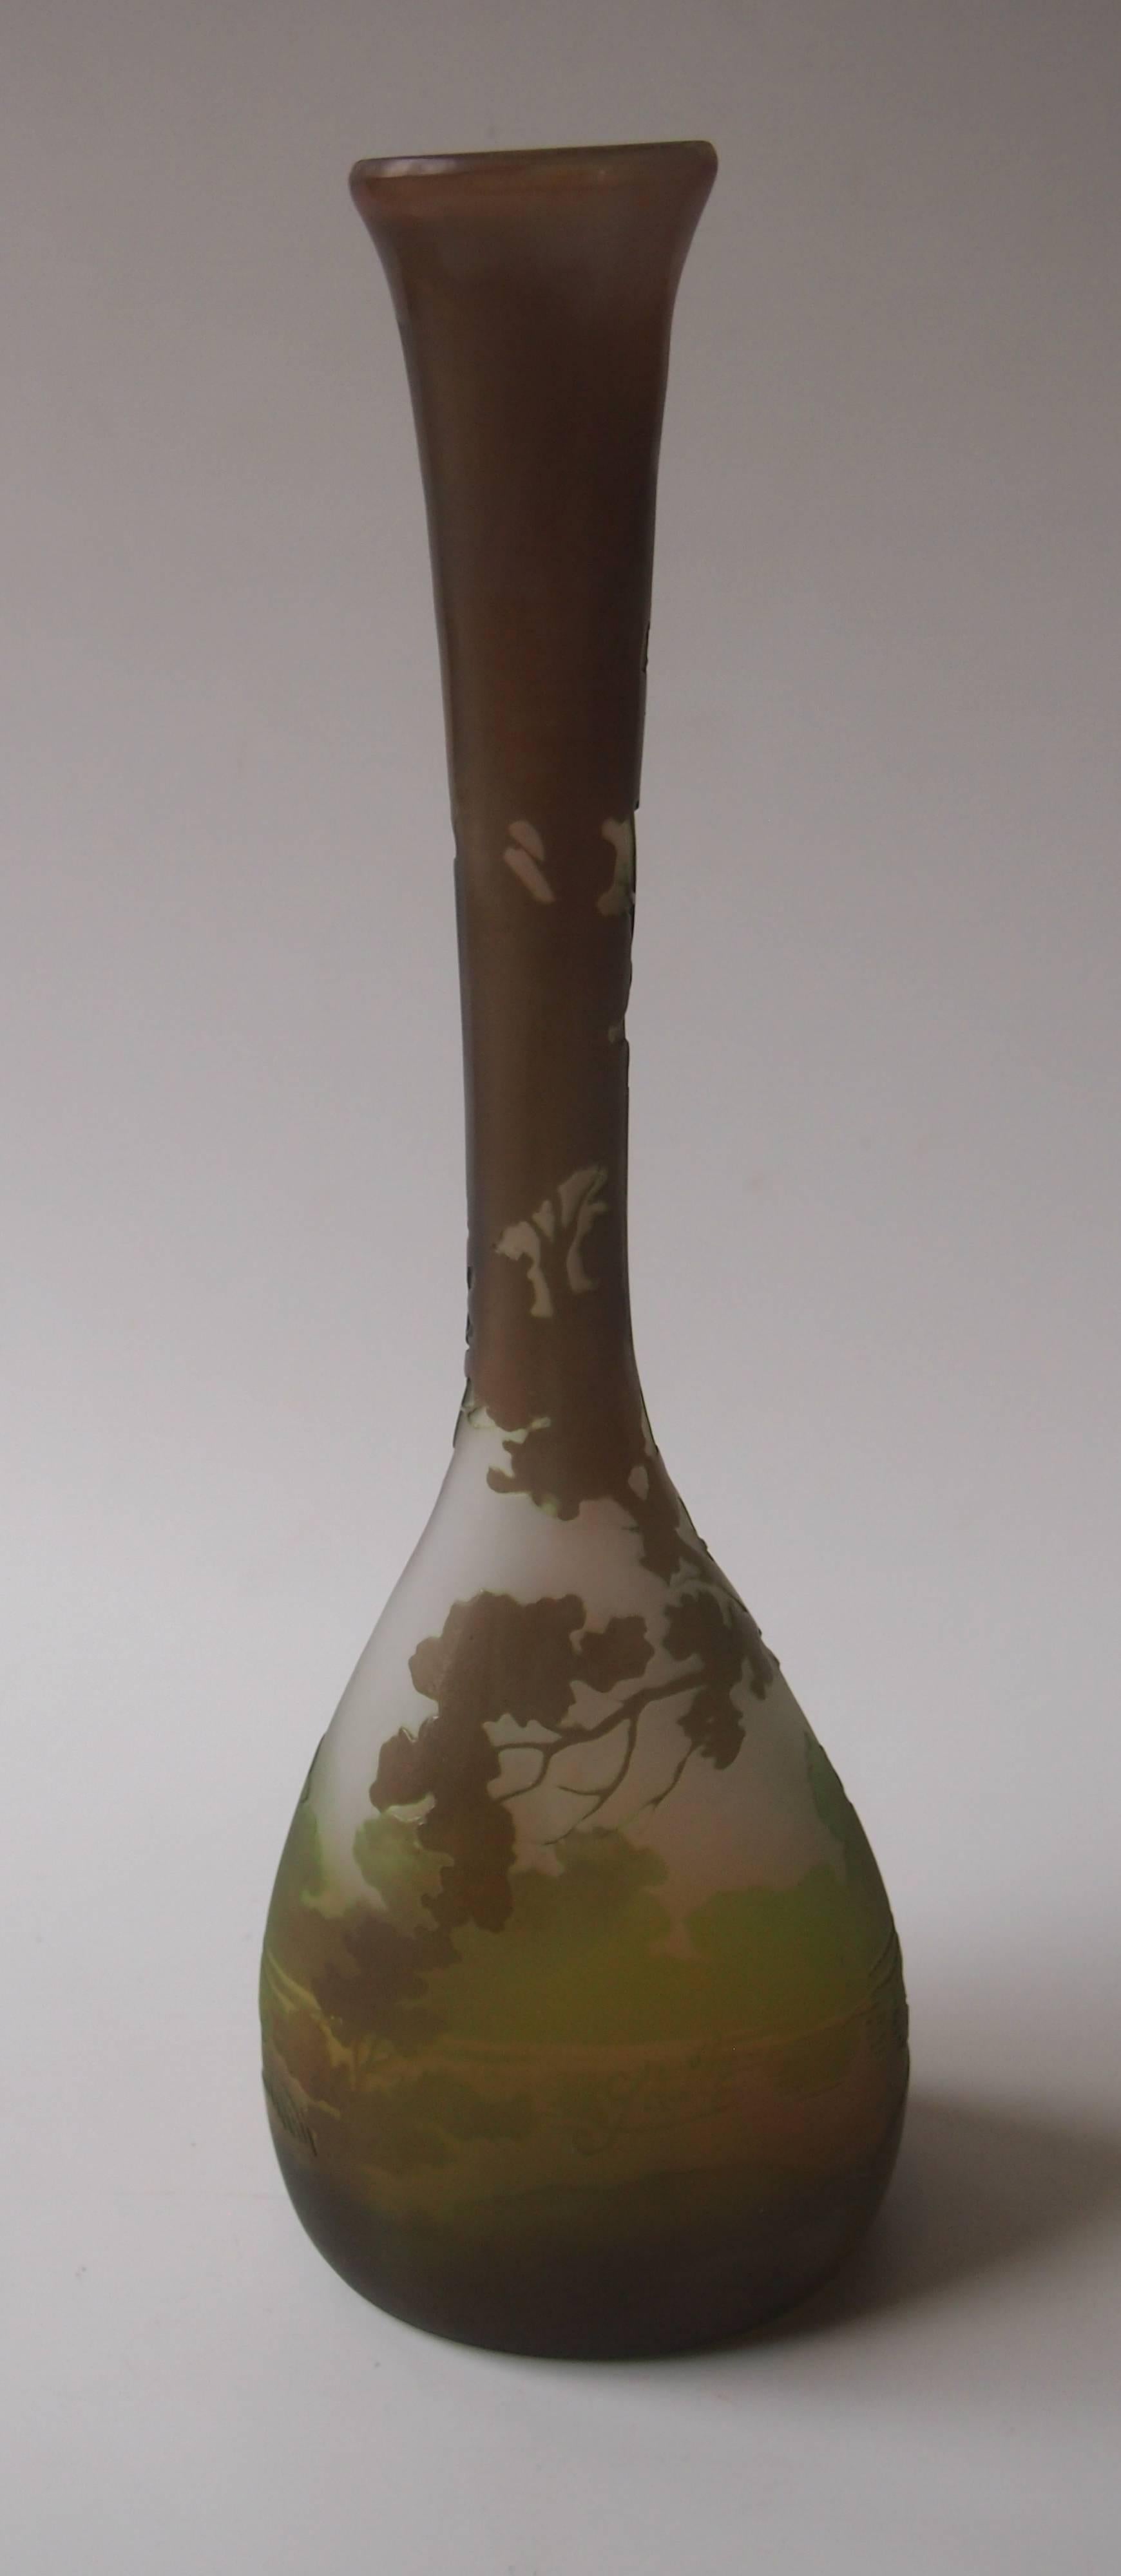 French Emile Galle Art Nouveau Cameo Glass Landscape Vase 1900 In Good Condition For Sale In London, GB